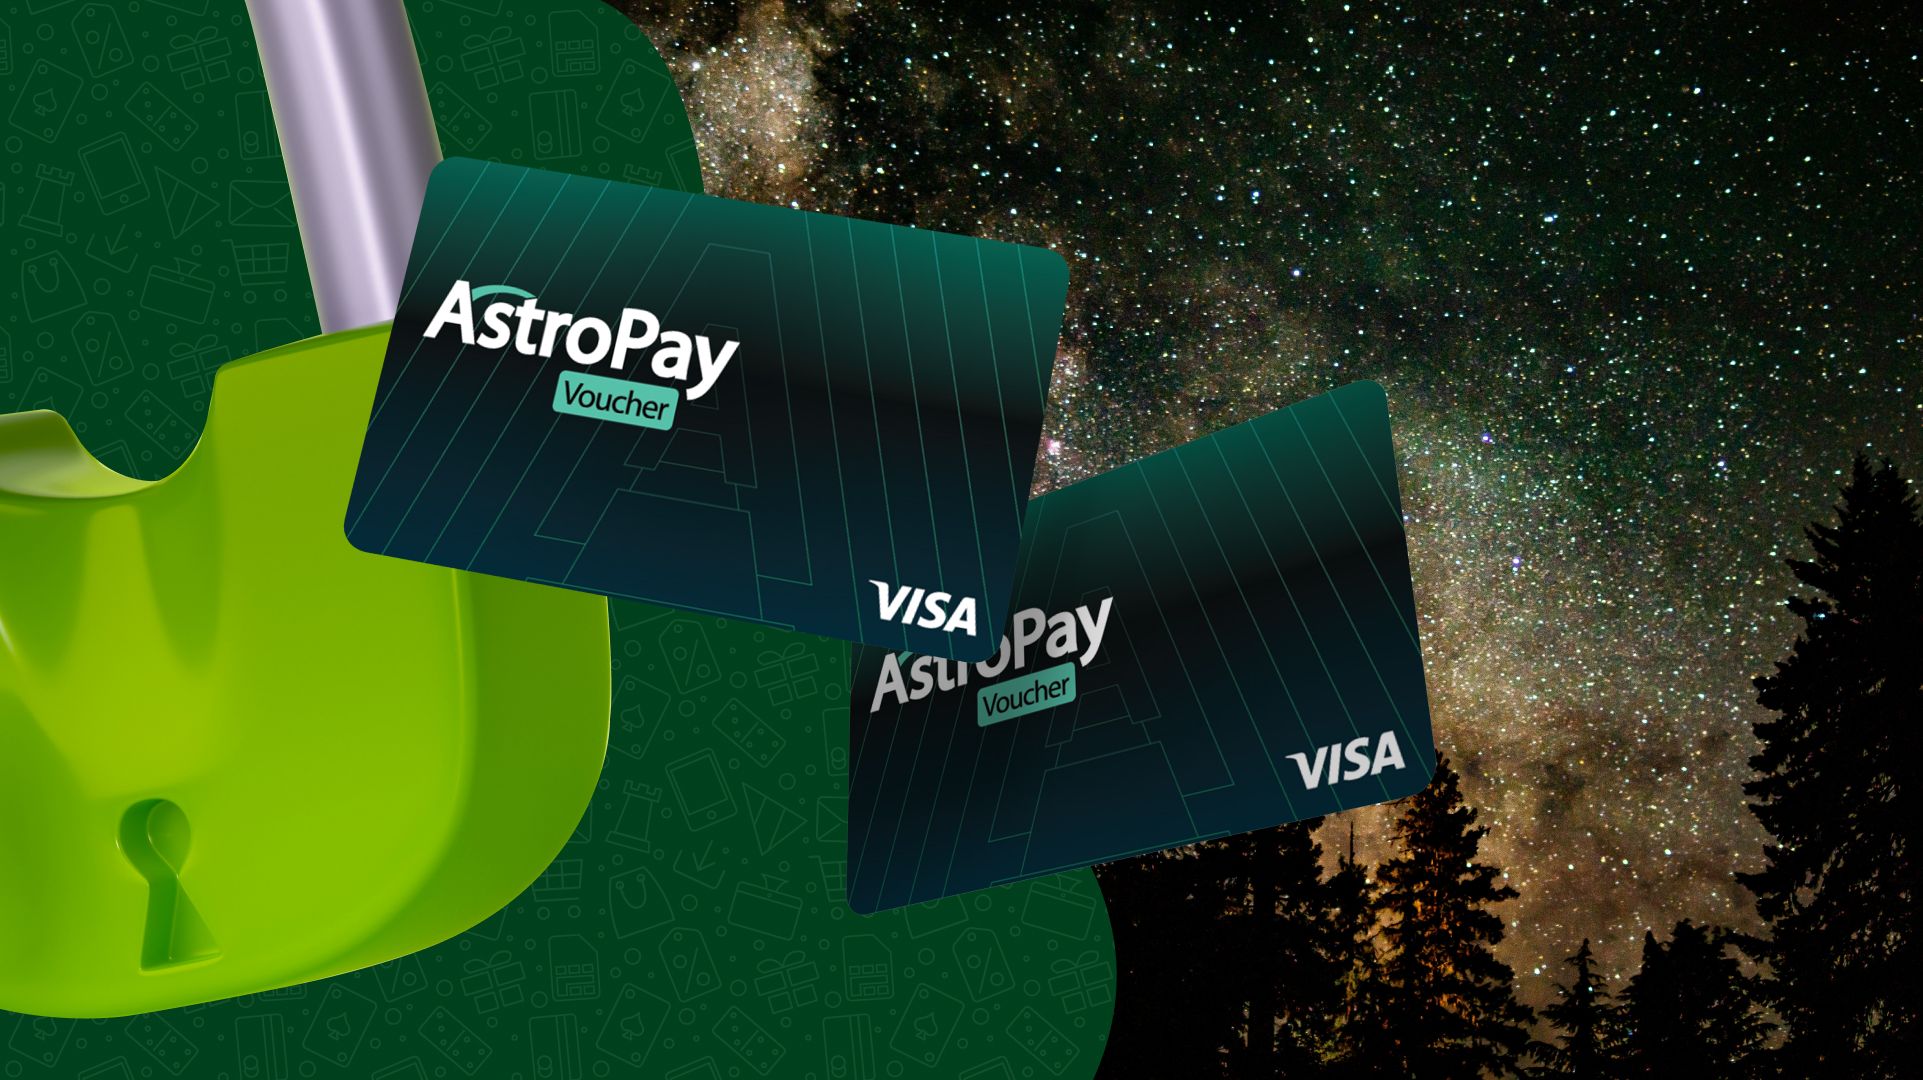 What is AstroPay?